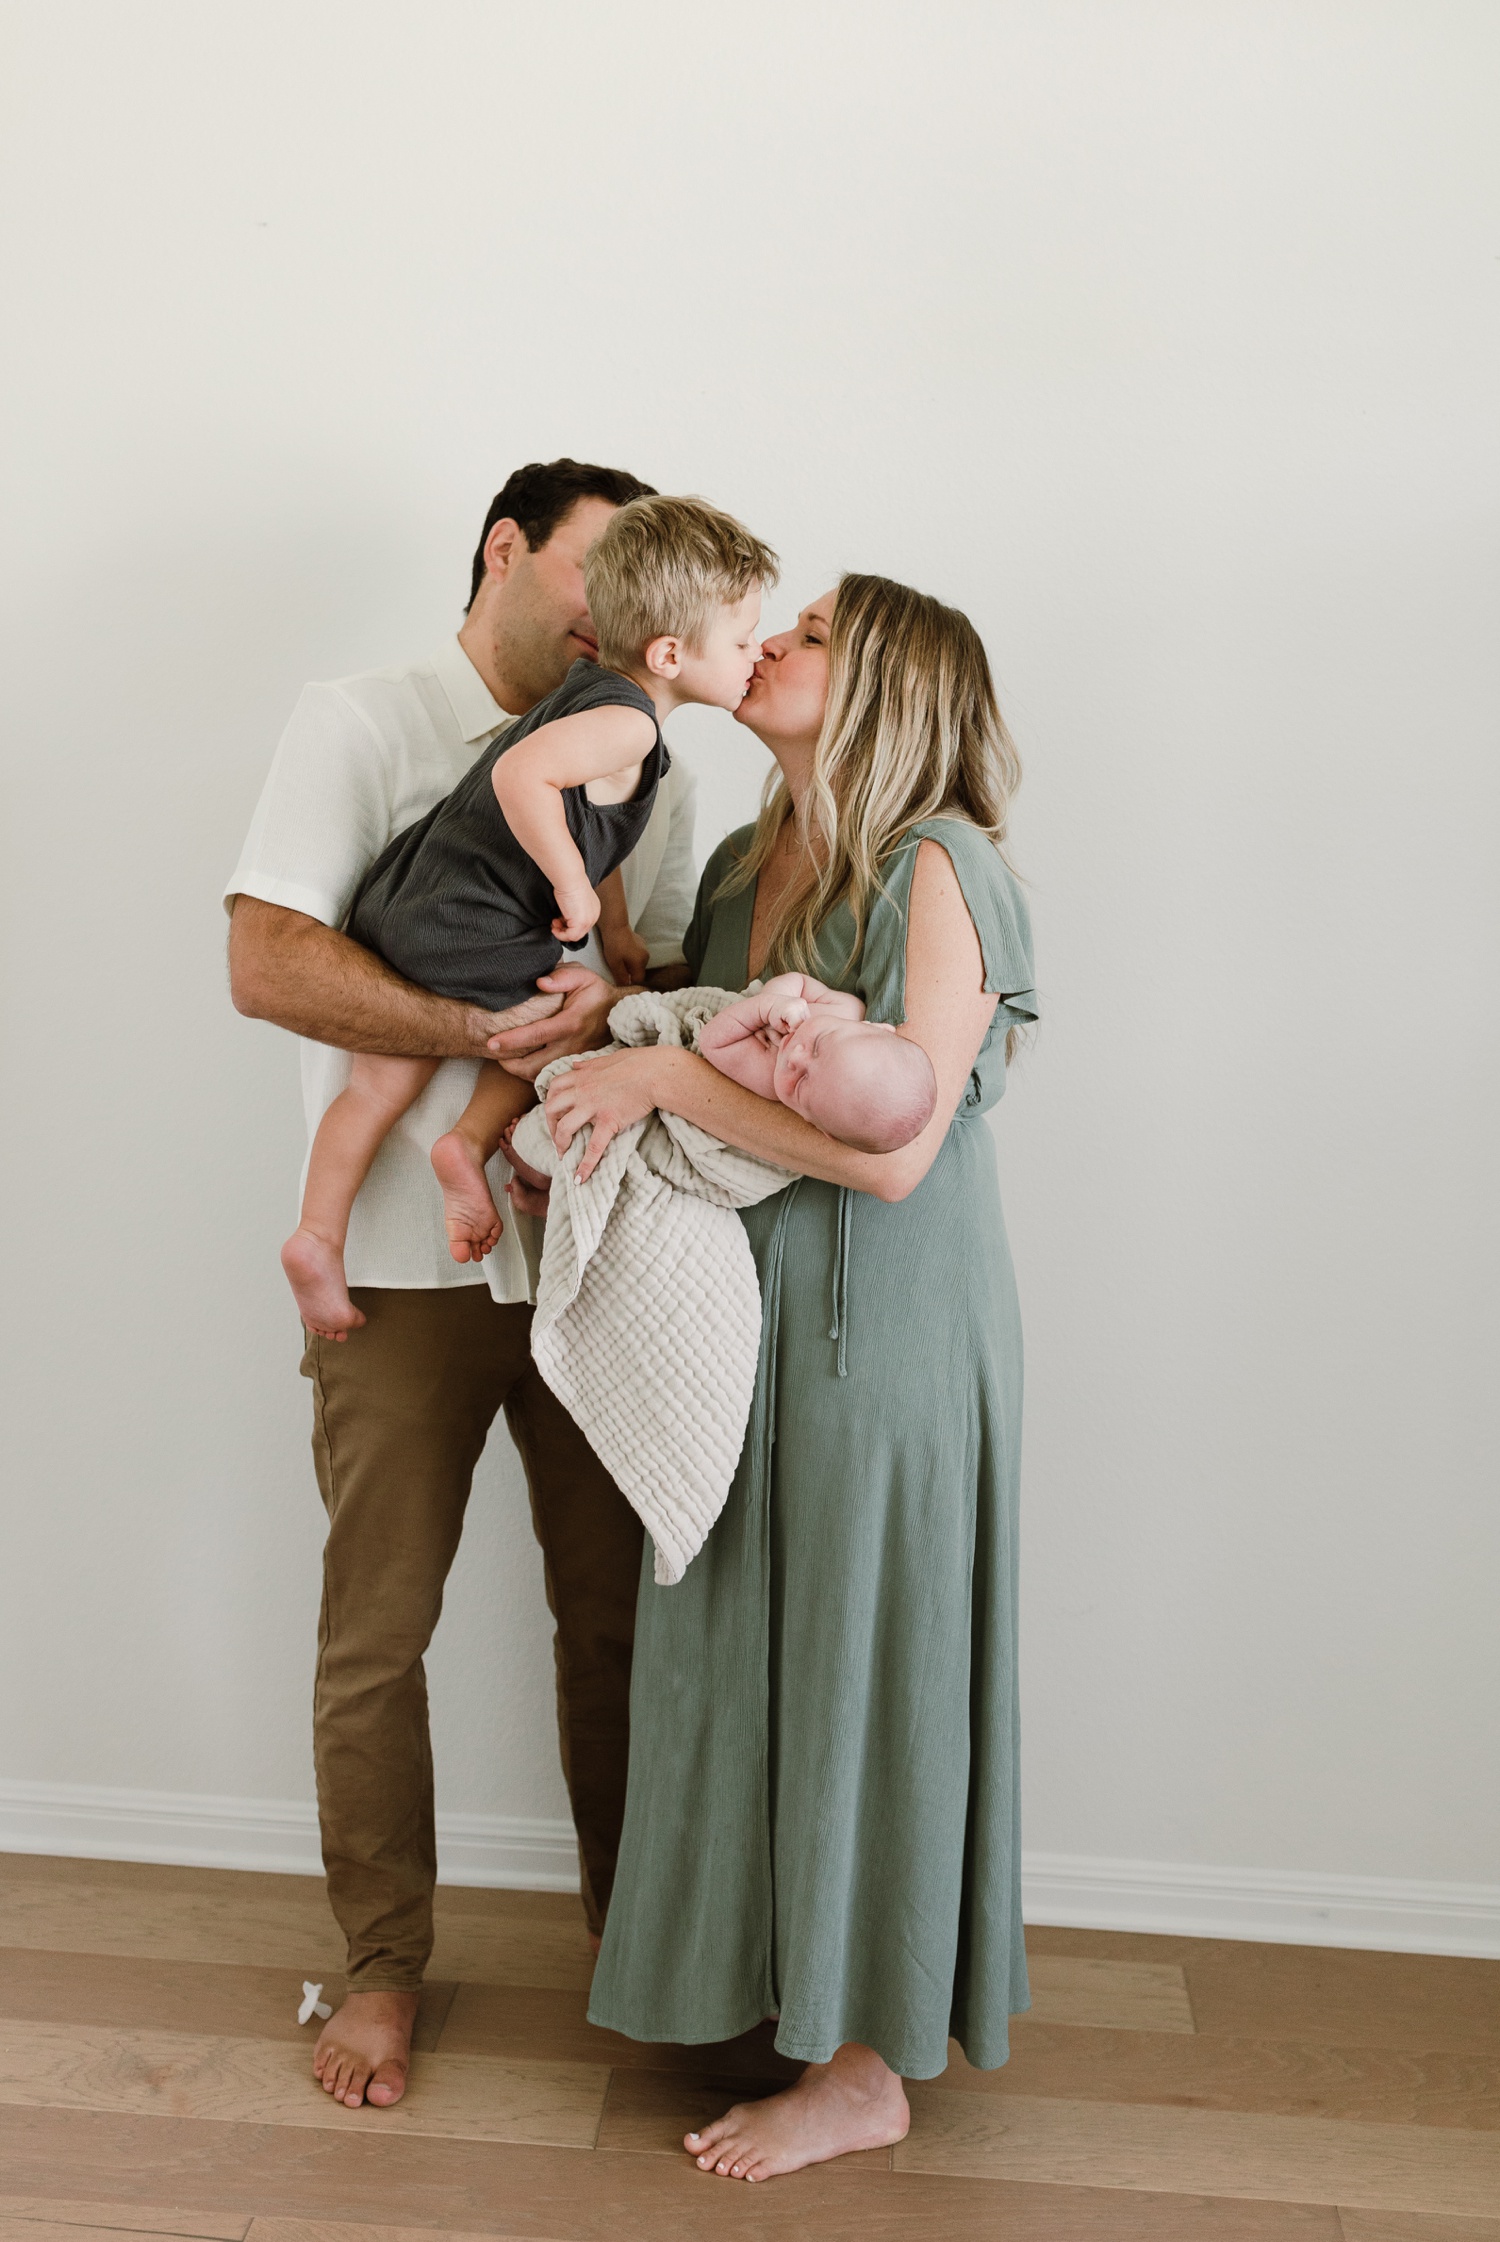 How to prepare for an at-home newborn session